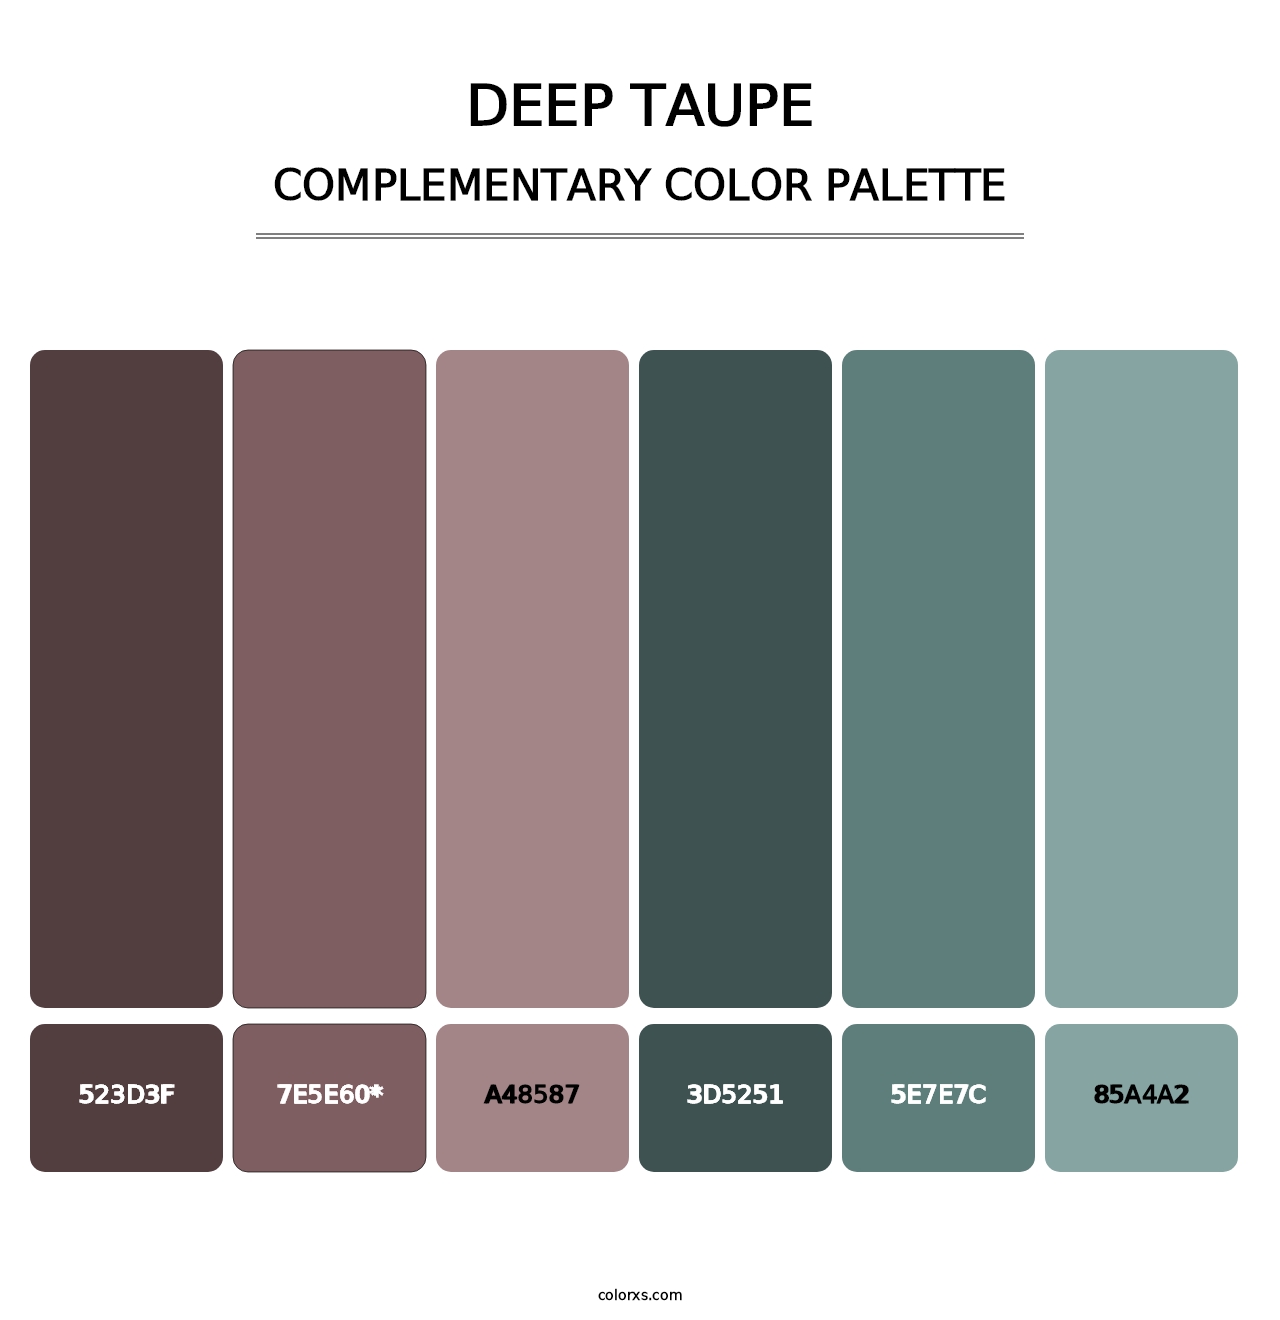 Deep Taupe - Complementary Color Palette